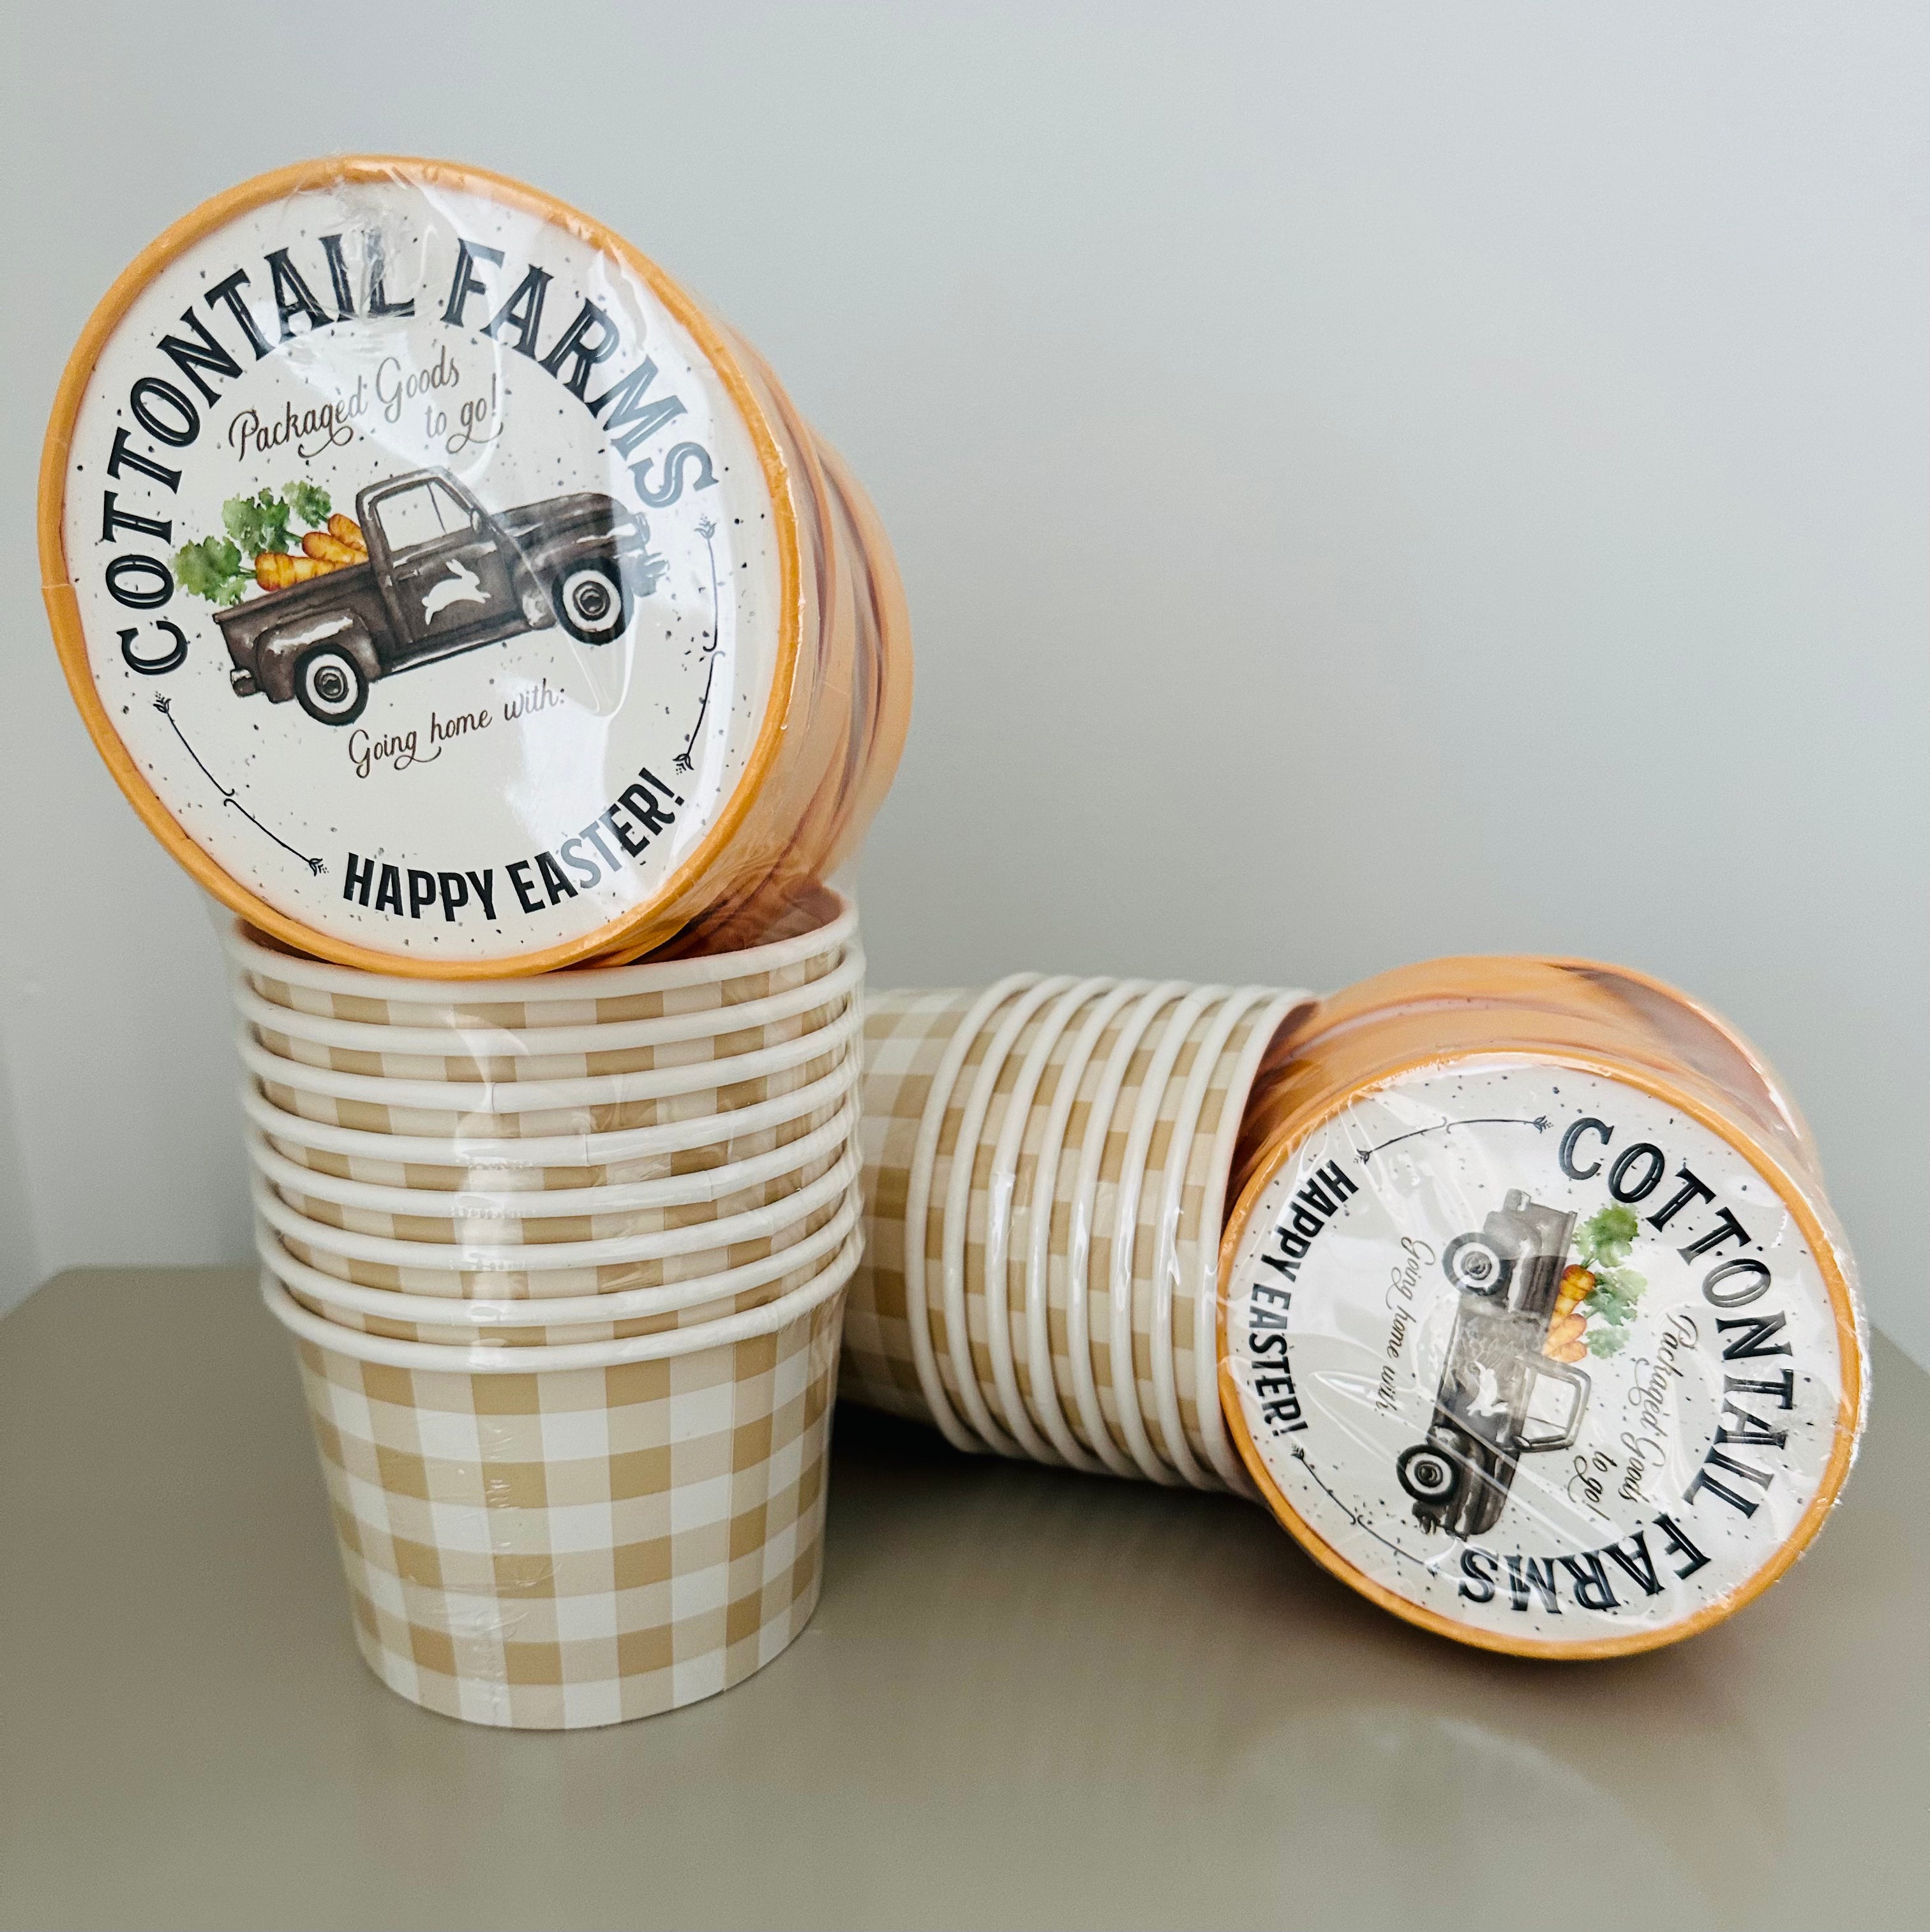 Mini “To-Go” Easter Food Containers